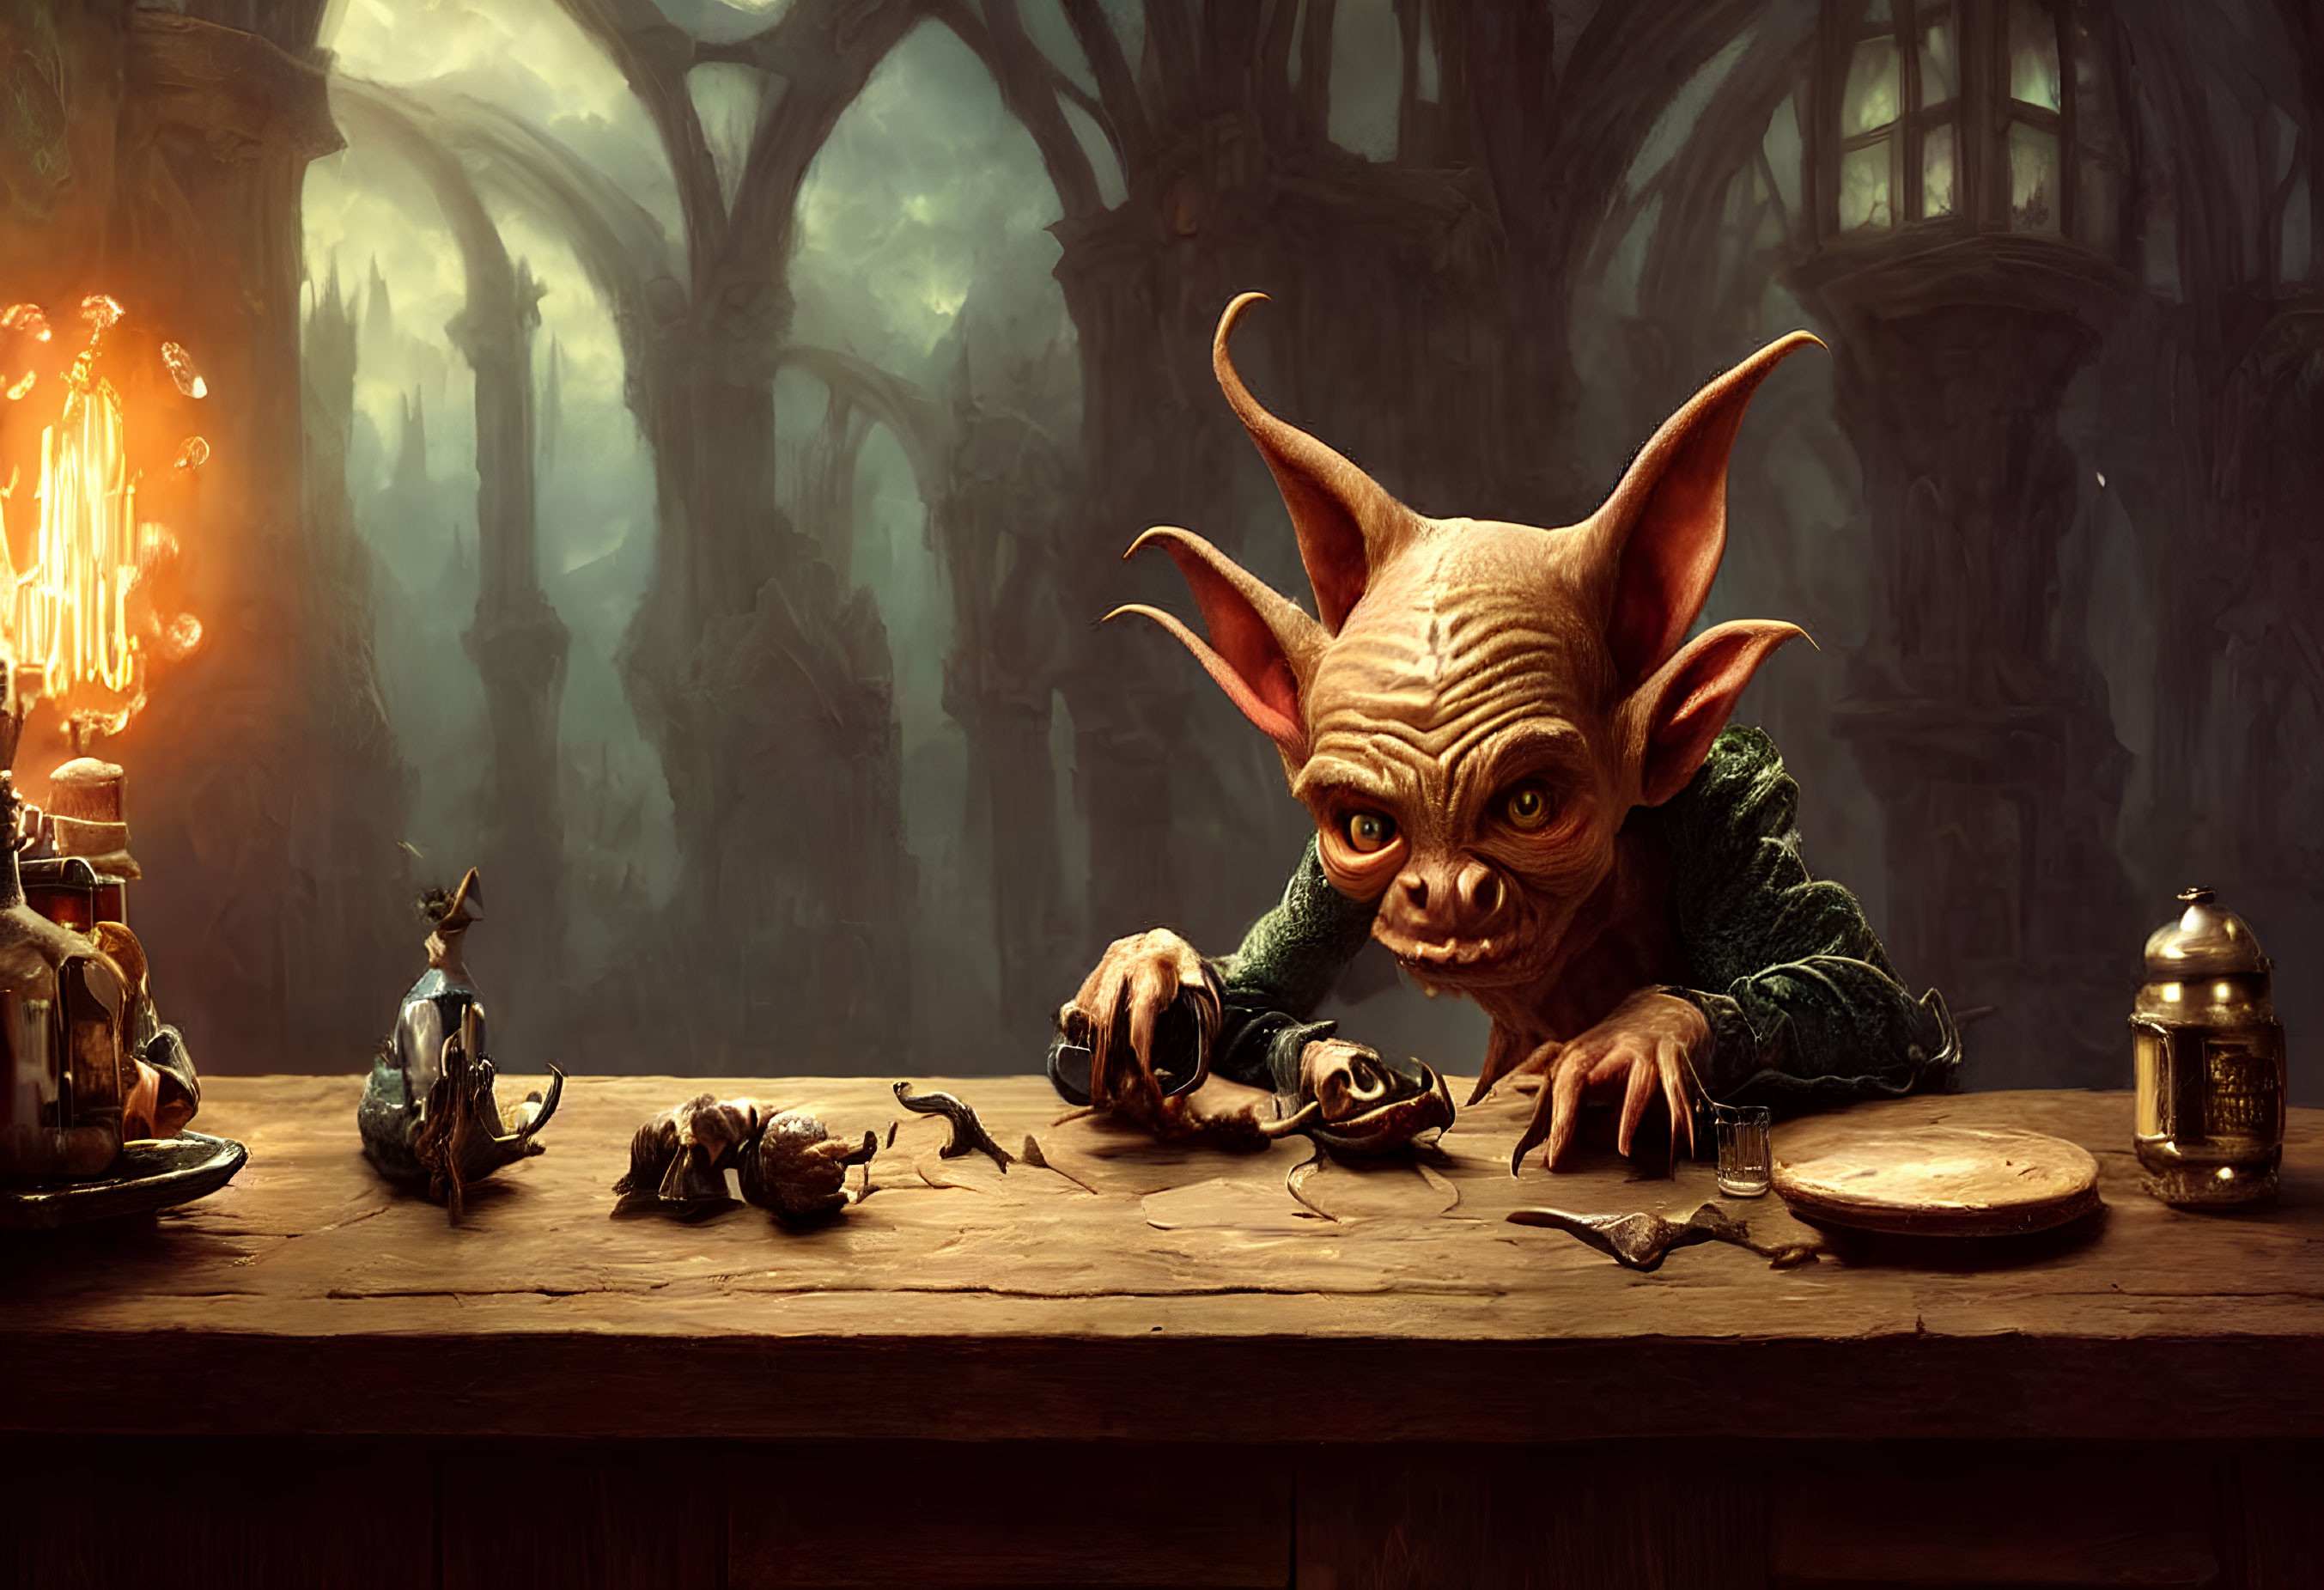 Goblin with large ears examines mechanical insects at wooden table